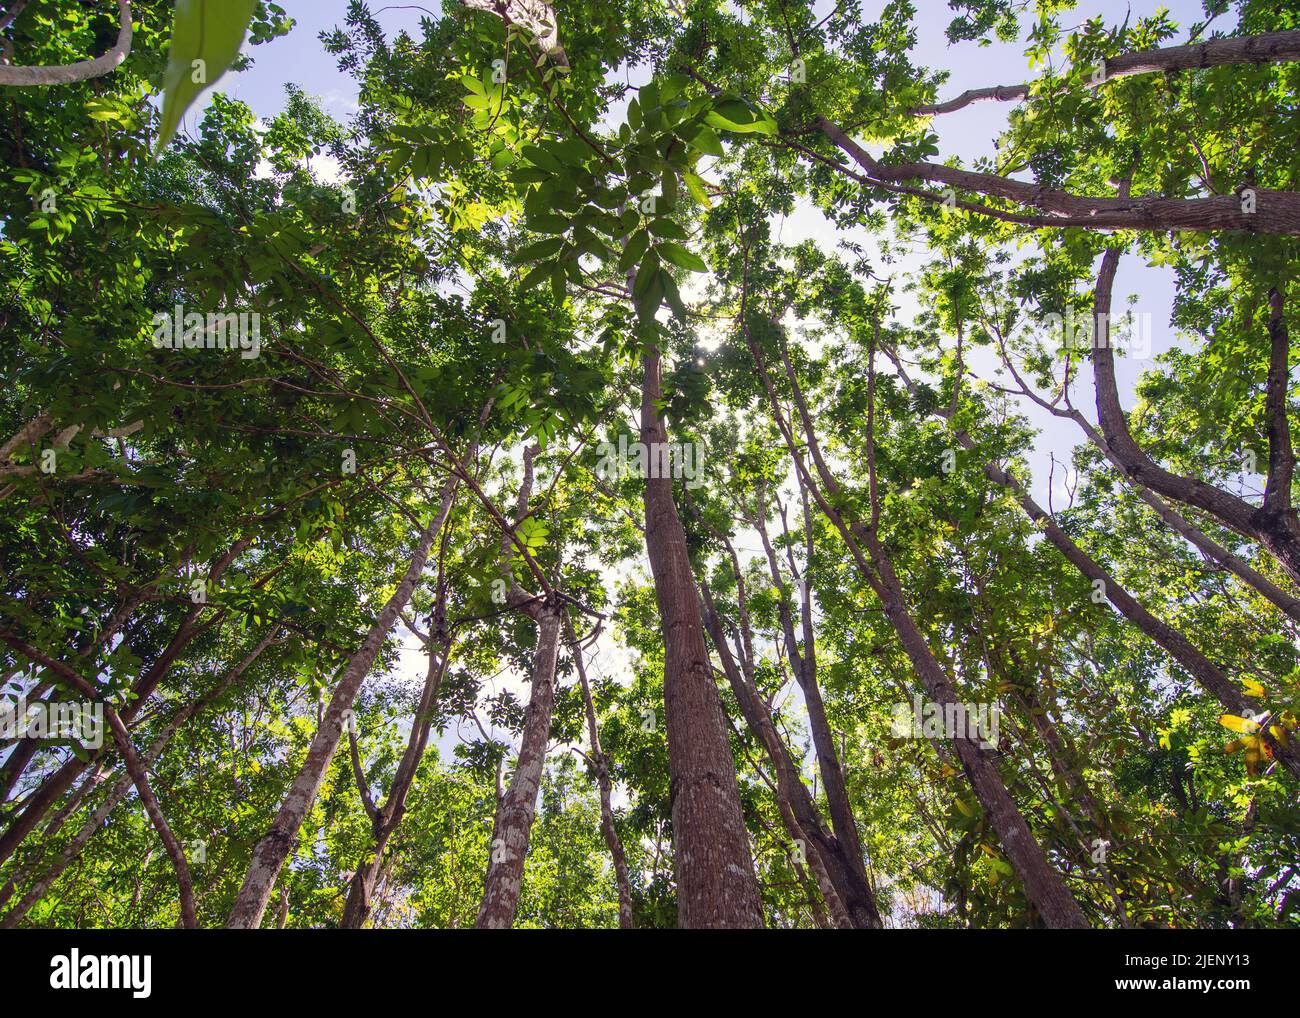 looking up under the canopy of trees Stock Photo